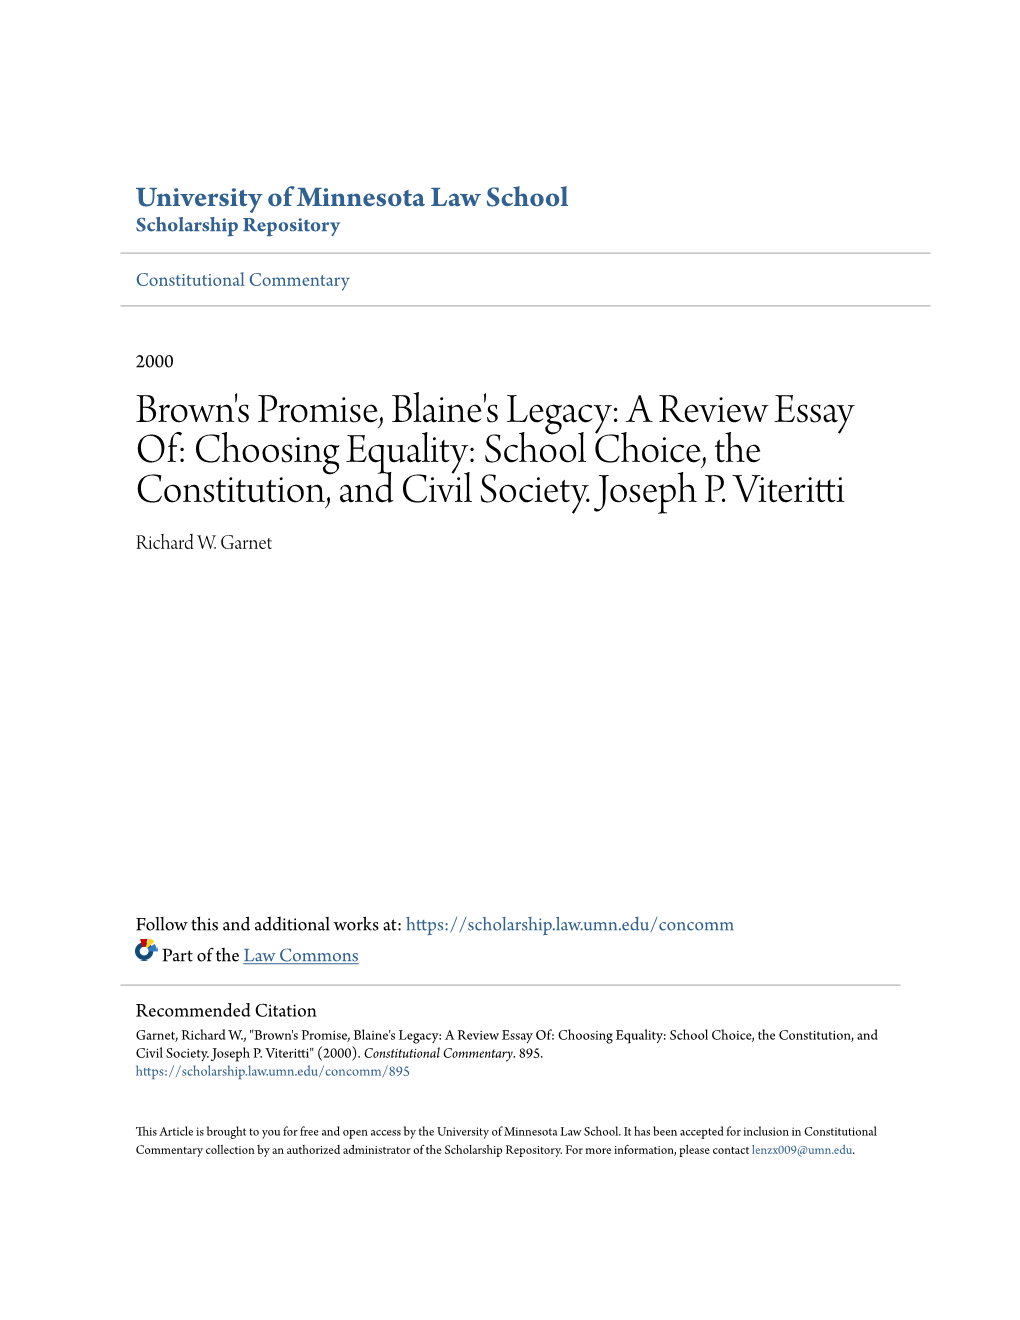 A Review Essay Of: Choosing Equality: School Choice, the Constitution, and Civil Society